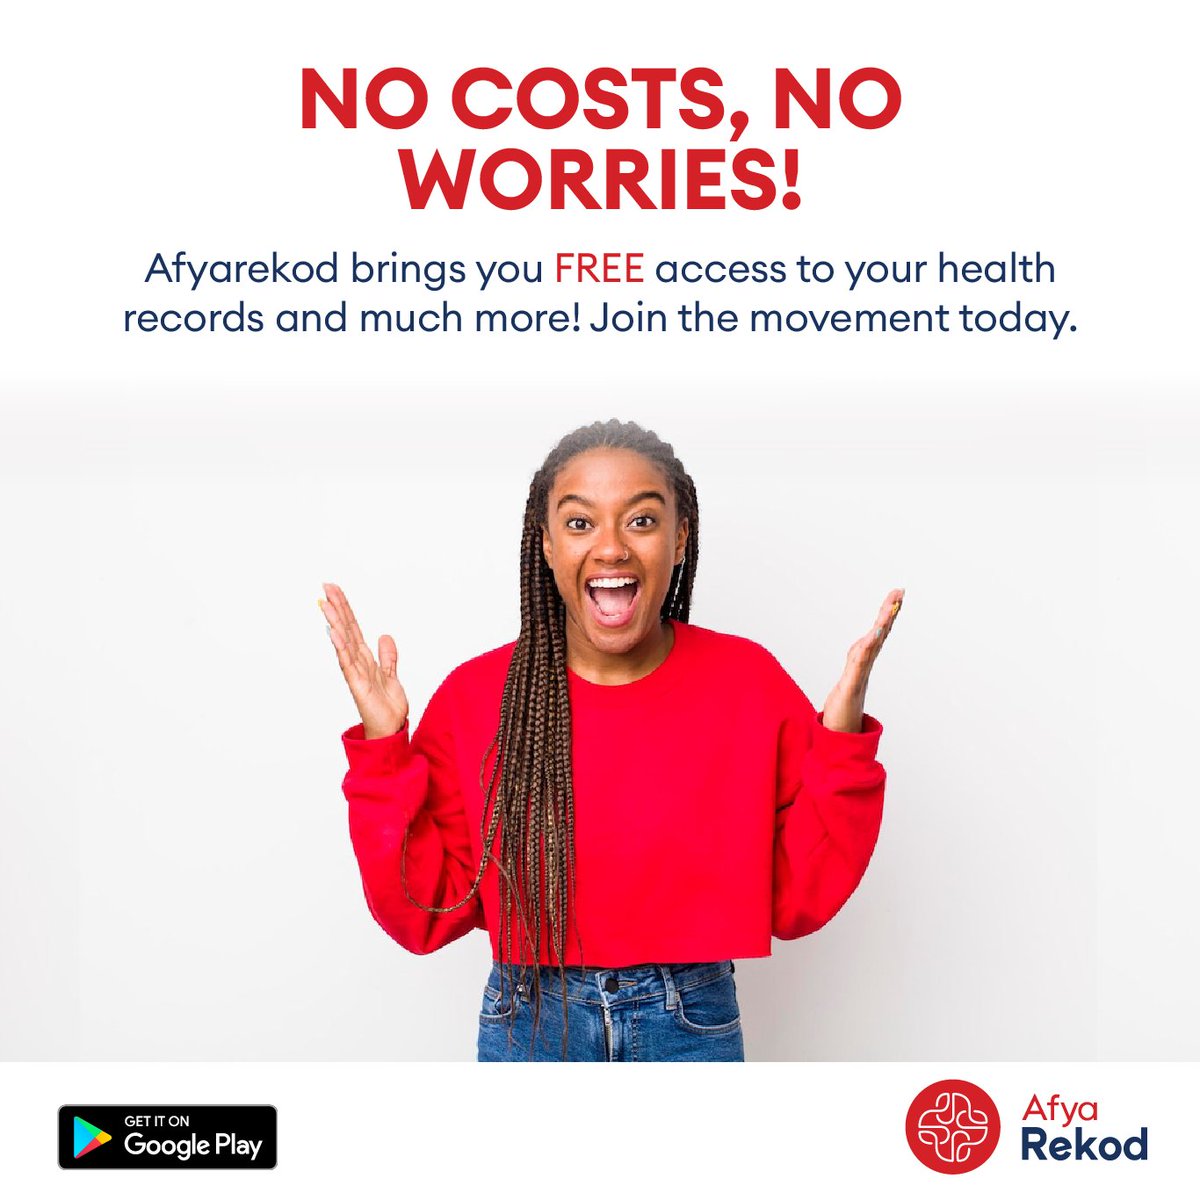 Don't believe us? Download the AfyaRekod app and see for yourself!  Absolutely 💯 free! 

#ownyourhealth